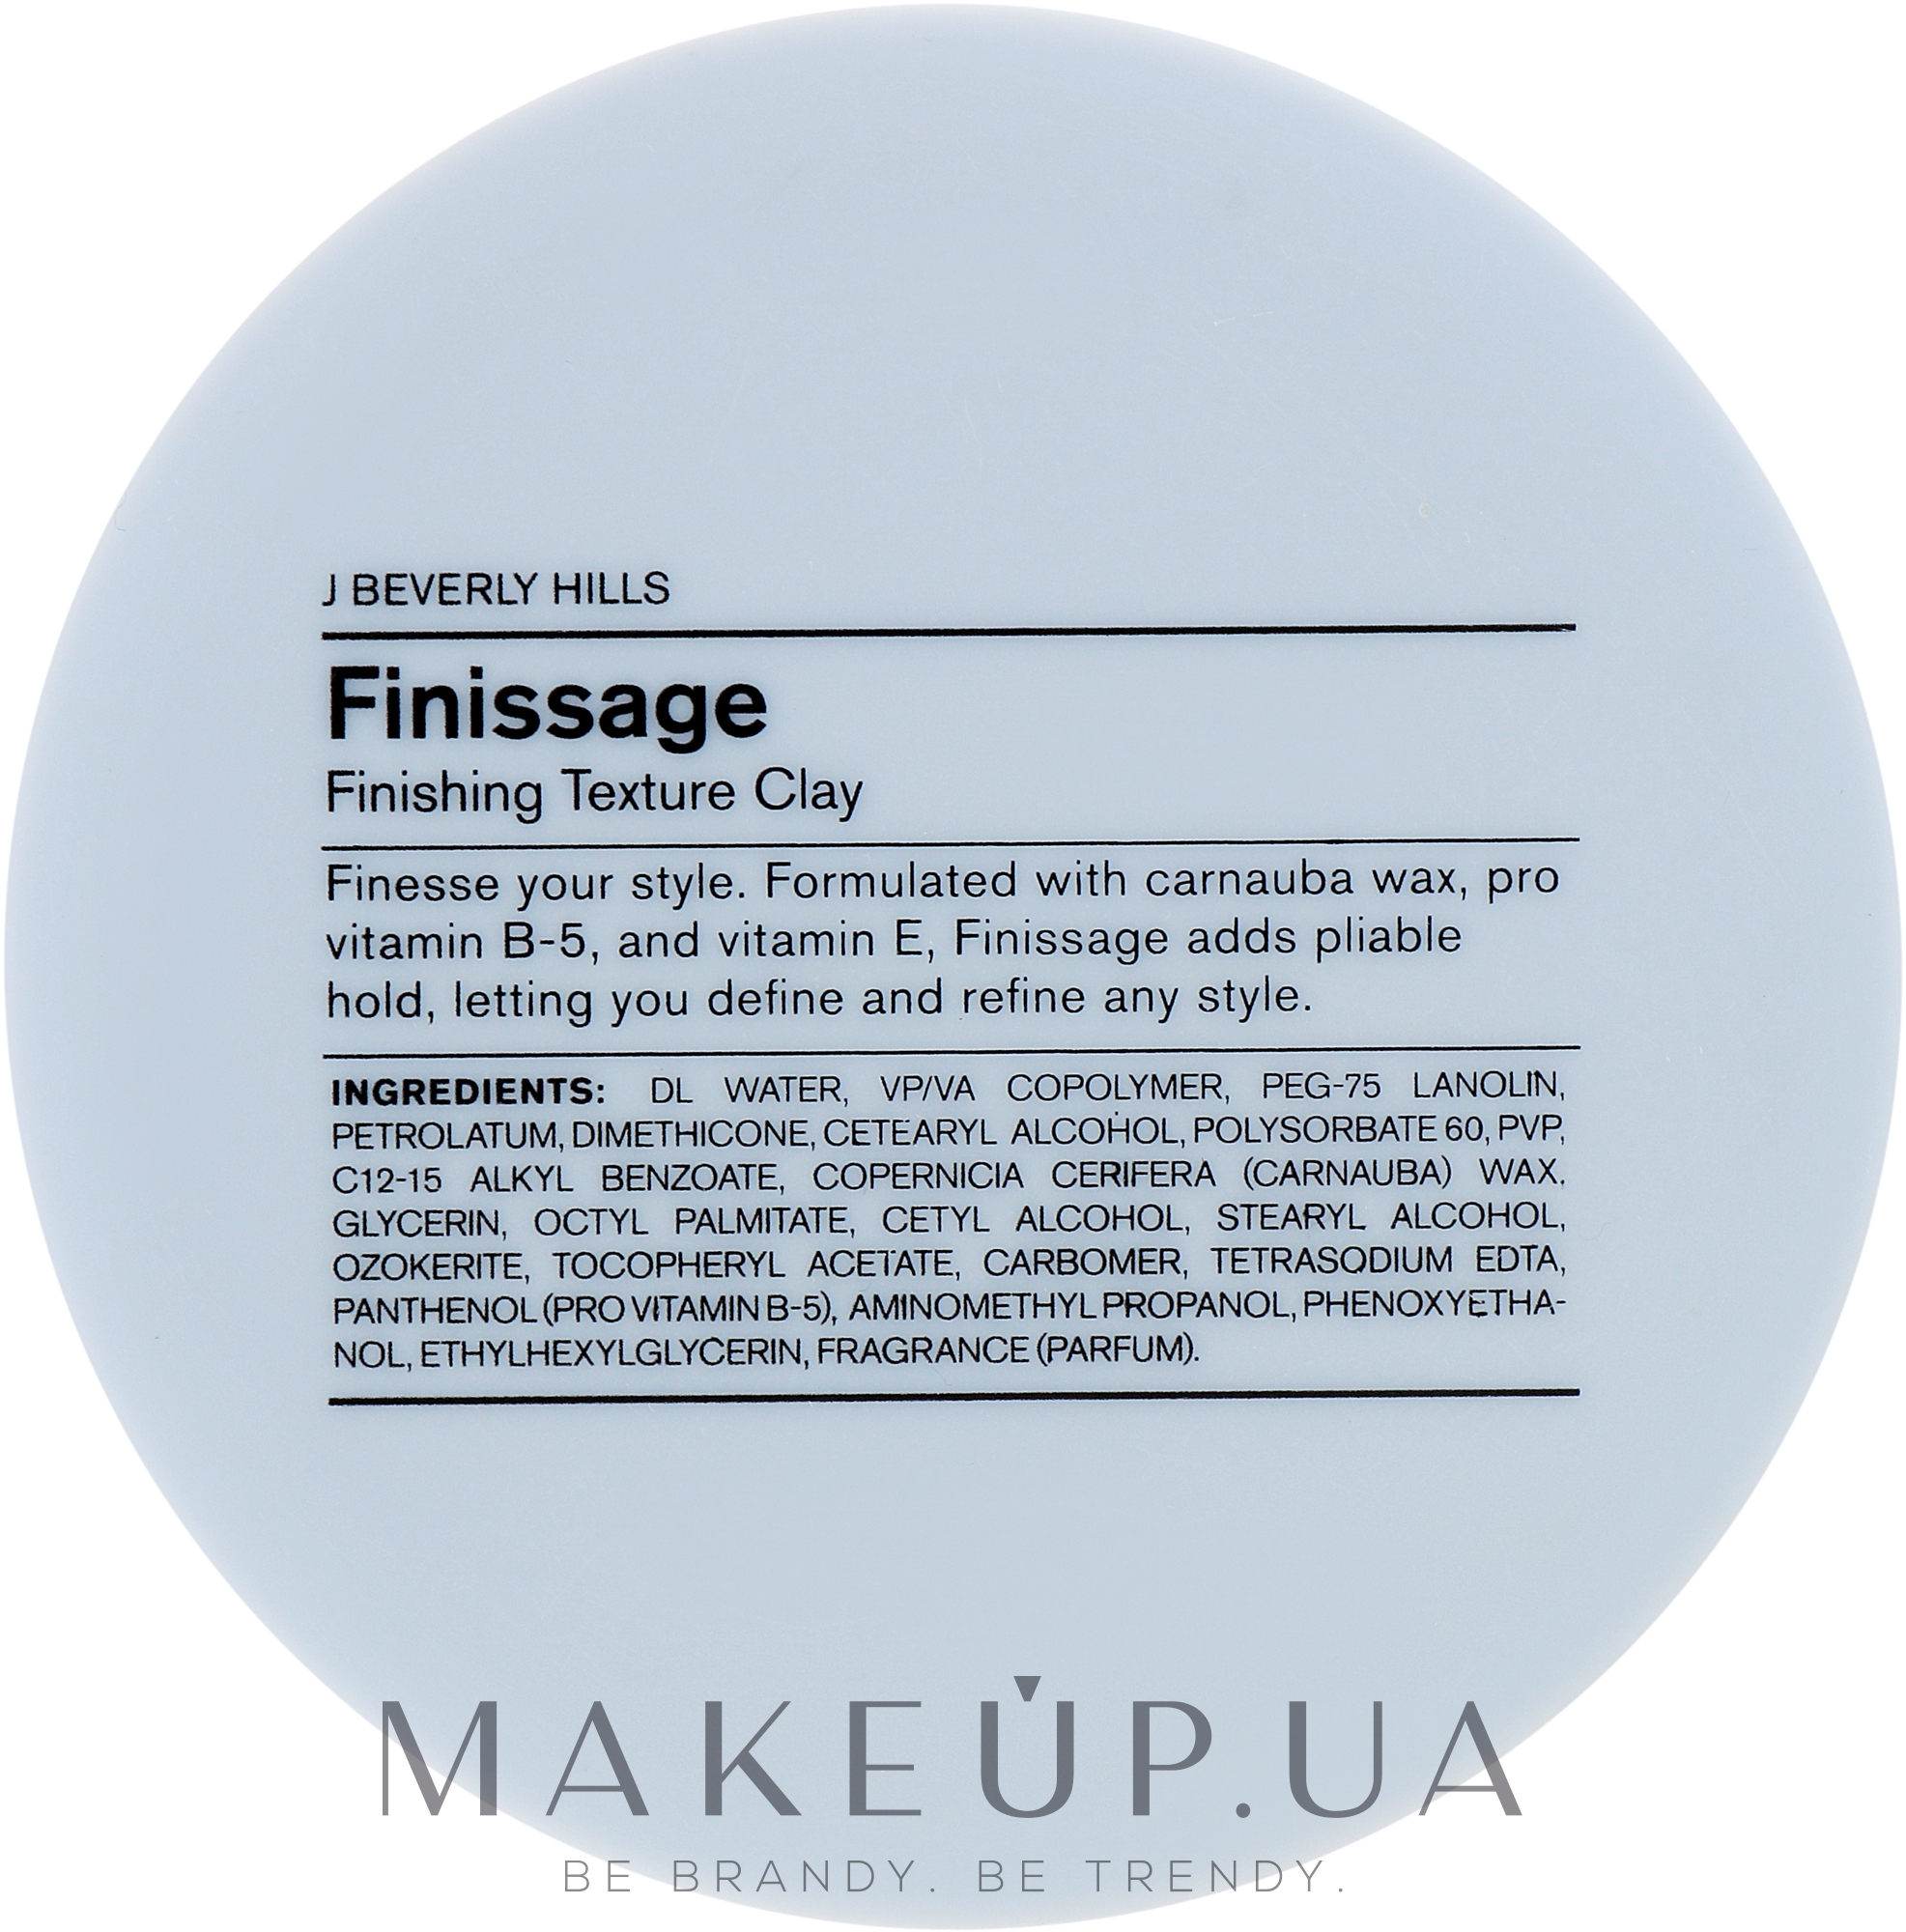 J Beverly Hills Finissage - Finishing Texture Clay - 2.5 oz